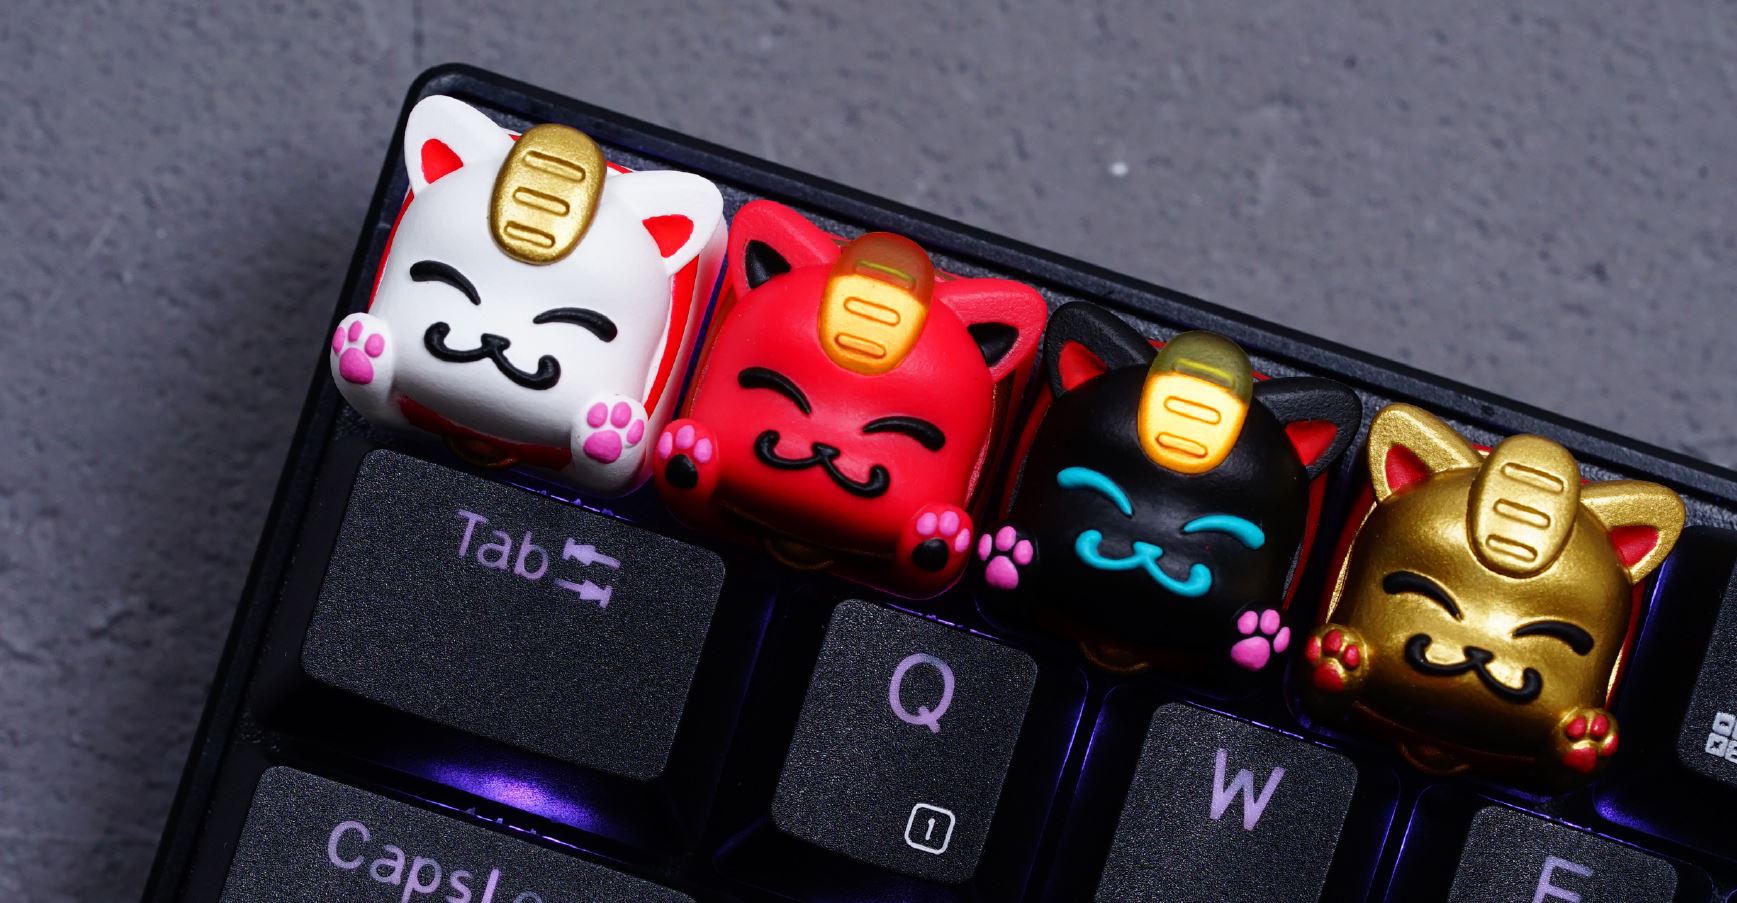 Hot Keys Project HKP Lucky Cat Red Artisan Keycap MKIL0PNC4B |27358|